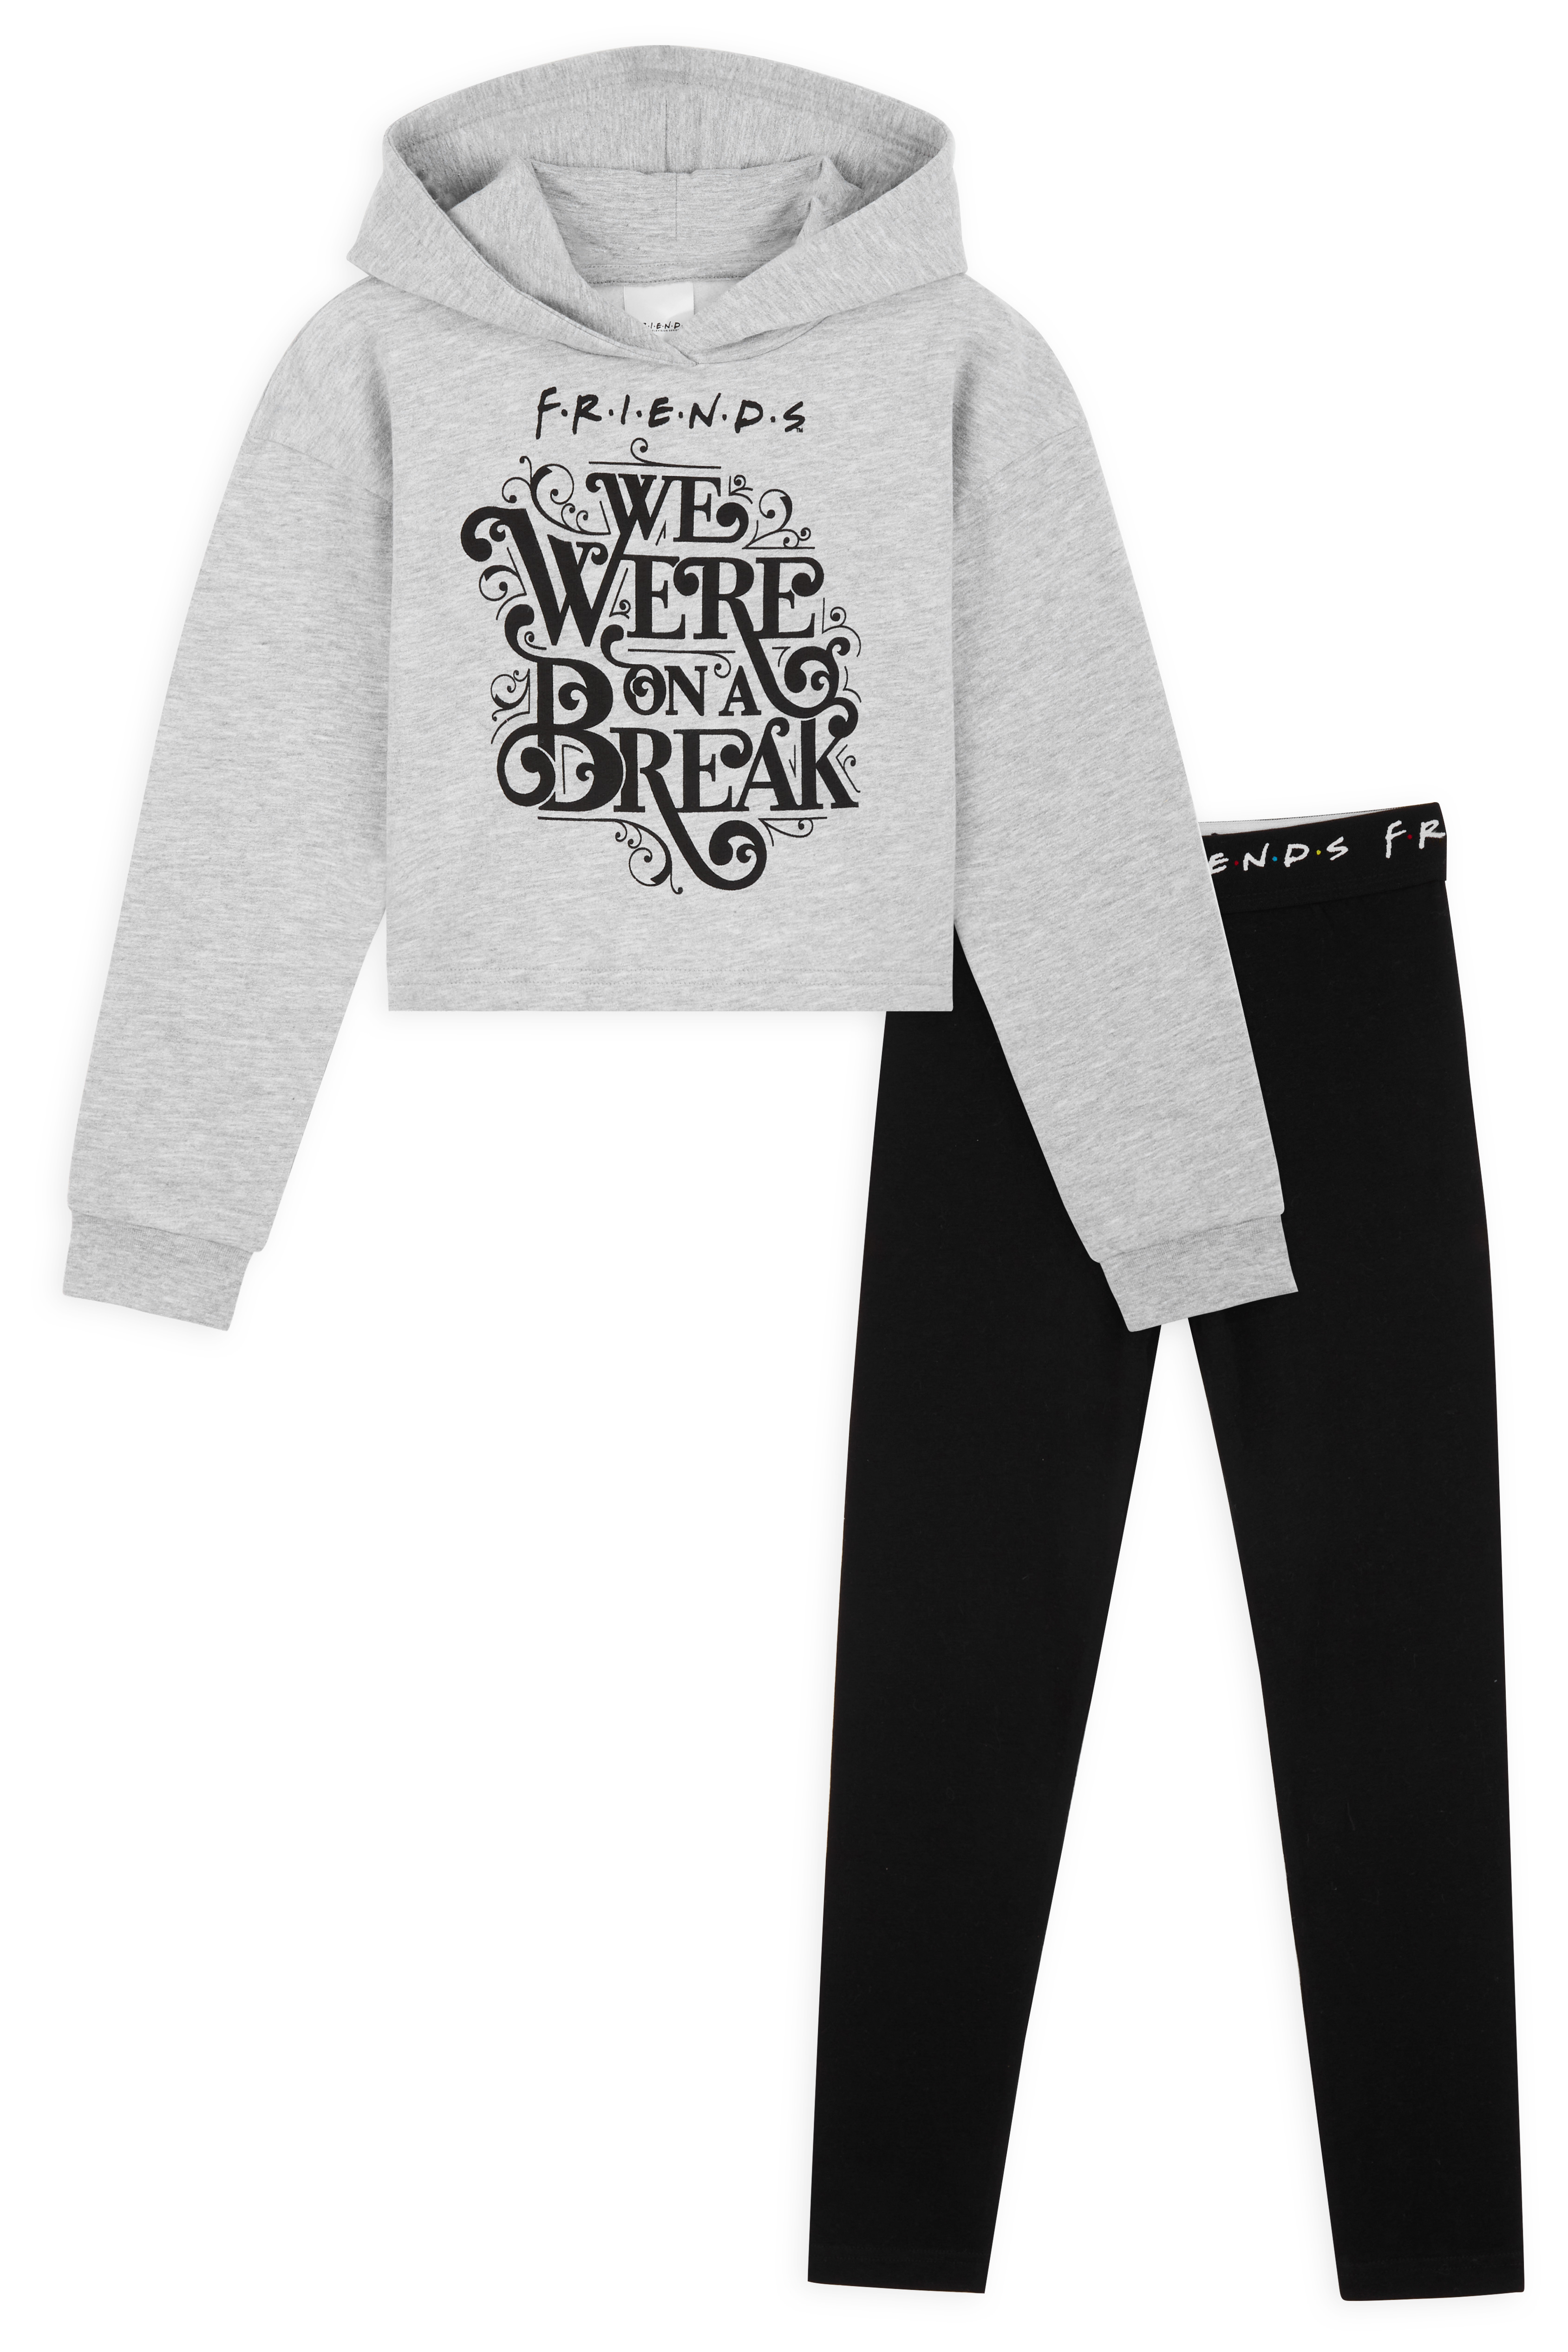 Friends Girls Tracksuit, Crop Top Hoodie and Leggings, Clothes for